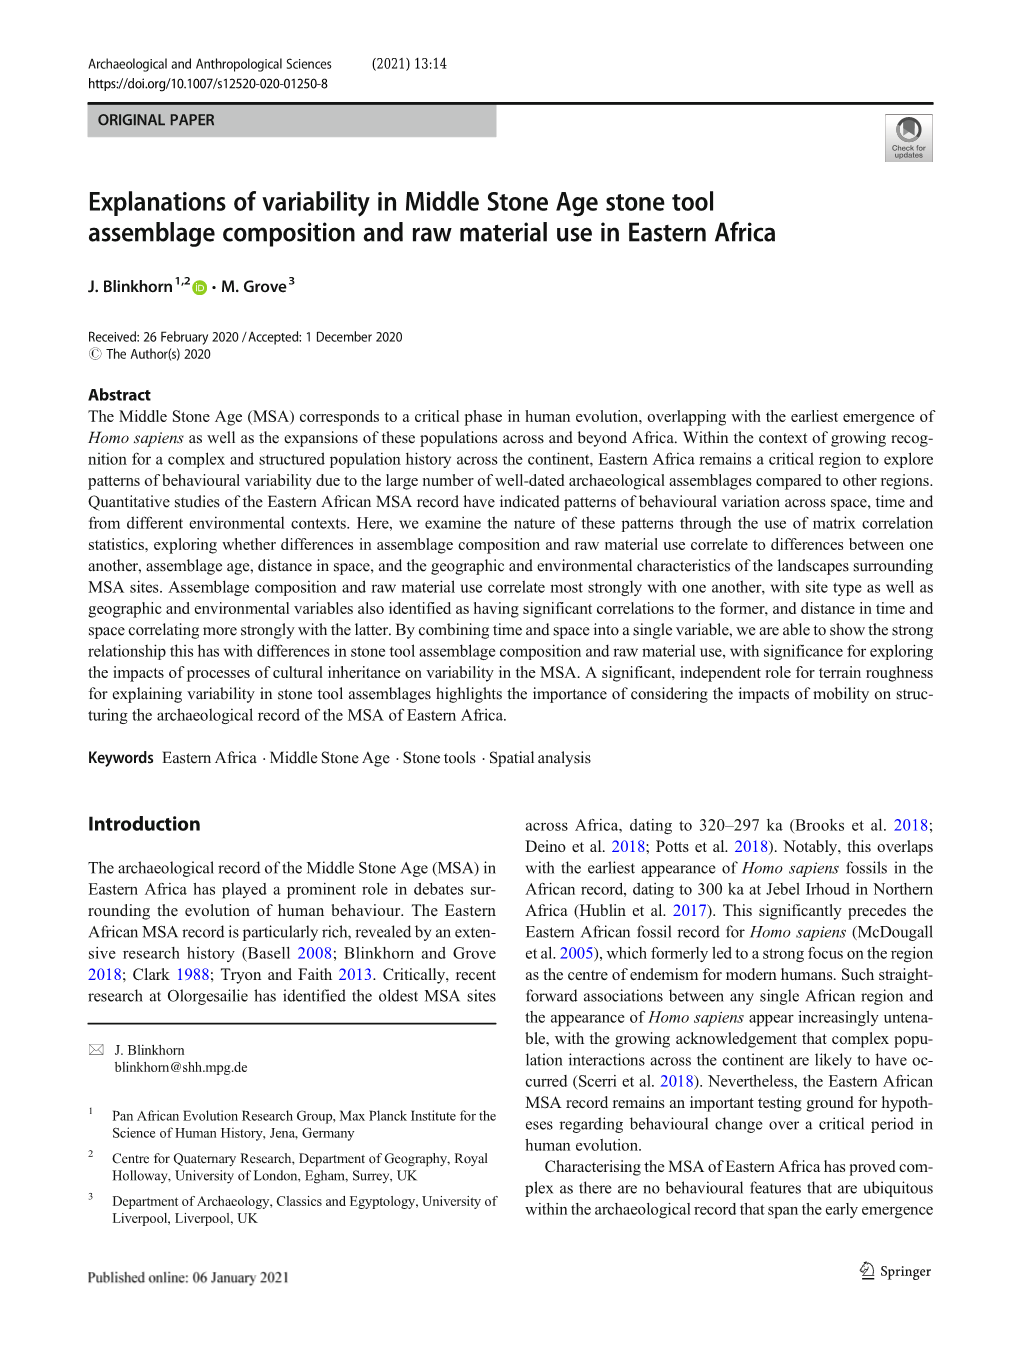 Explanations of Variability in Middle Stone Age Stone Tool Assemblage Composition and Raw Material Use in Eastern Africa